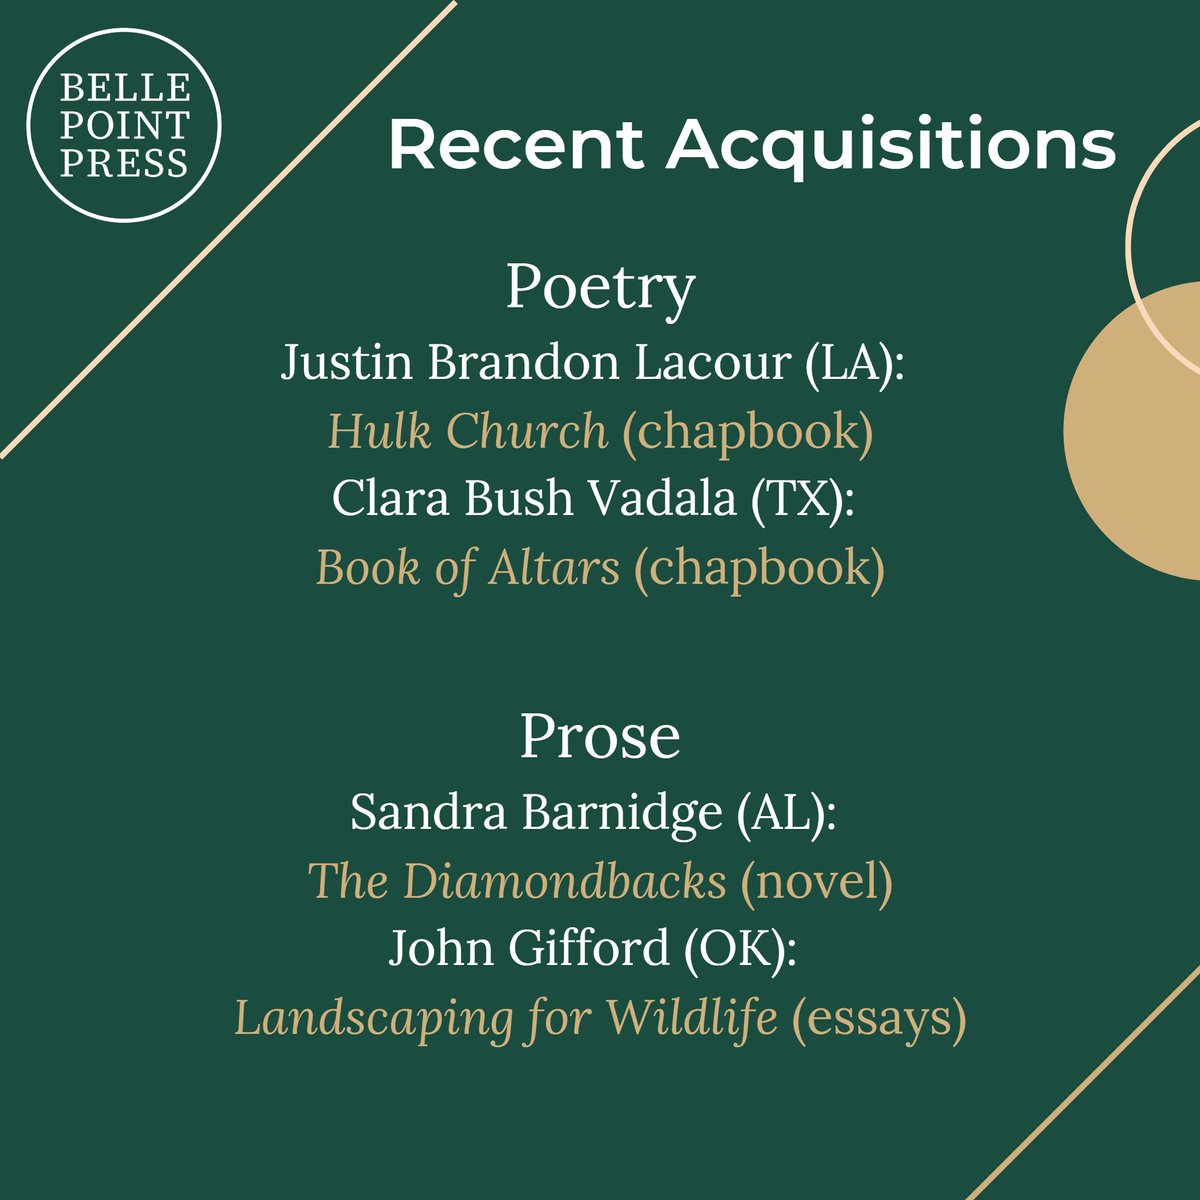 As we work through sonnet submissions, we also want to celebrate some other recent acquisitions. We're looking forward to sharing these poetry chapbooks and prose books! Thanks to @TrampolinePoet1, @doctorVpoetry, @SKBarnidge, and John Gifford for trusting us with their work!